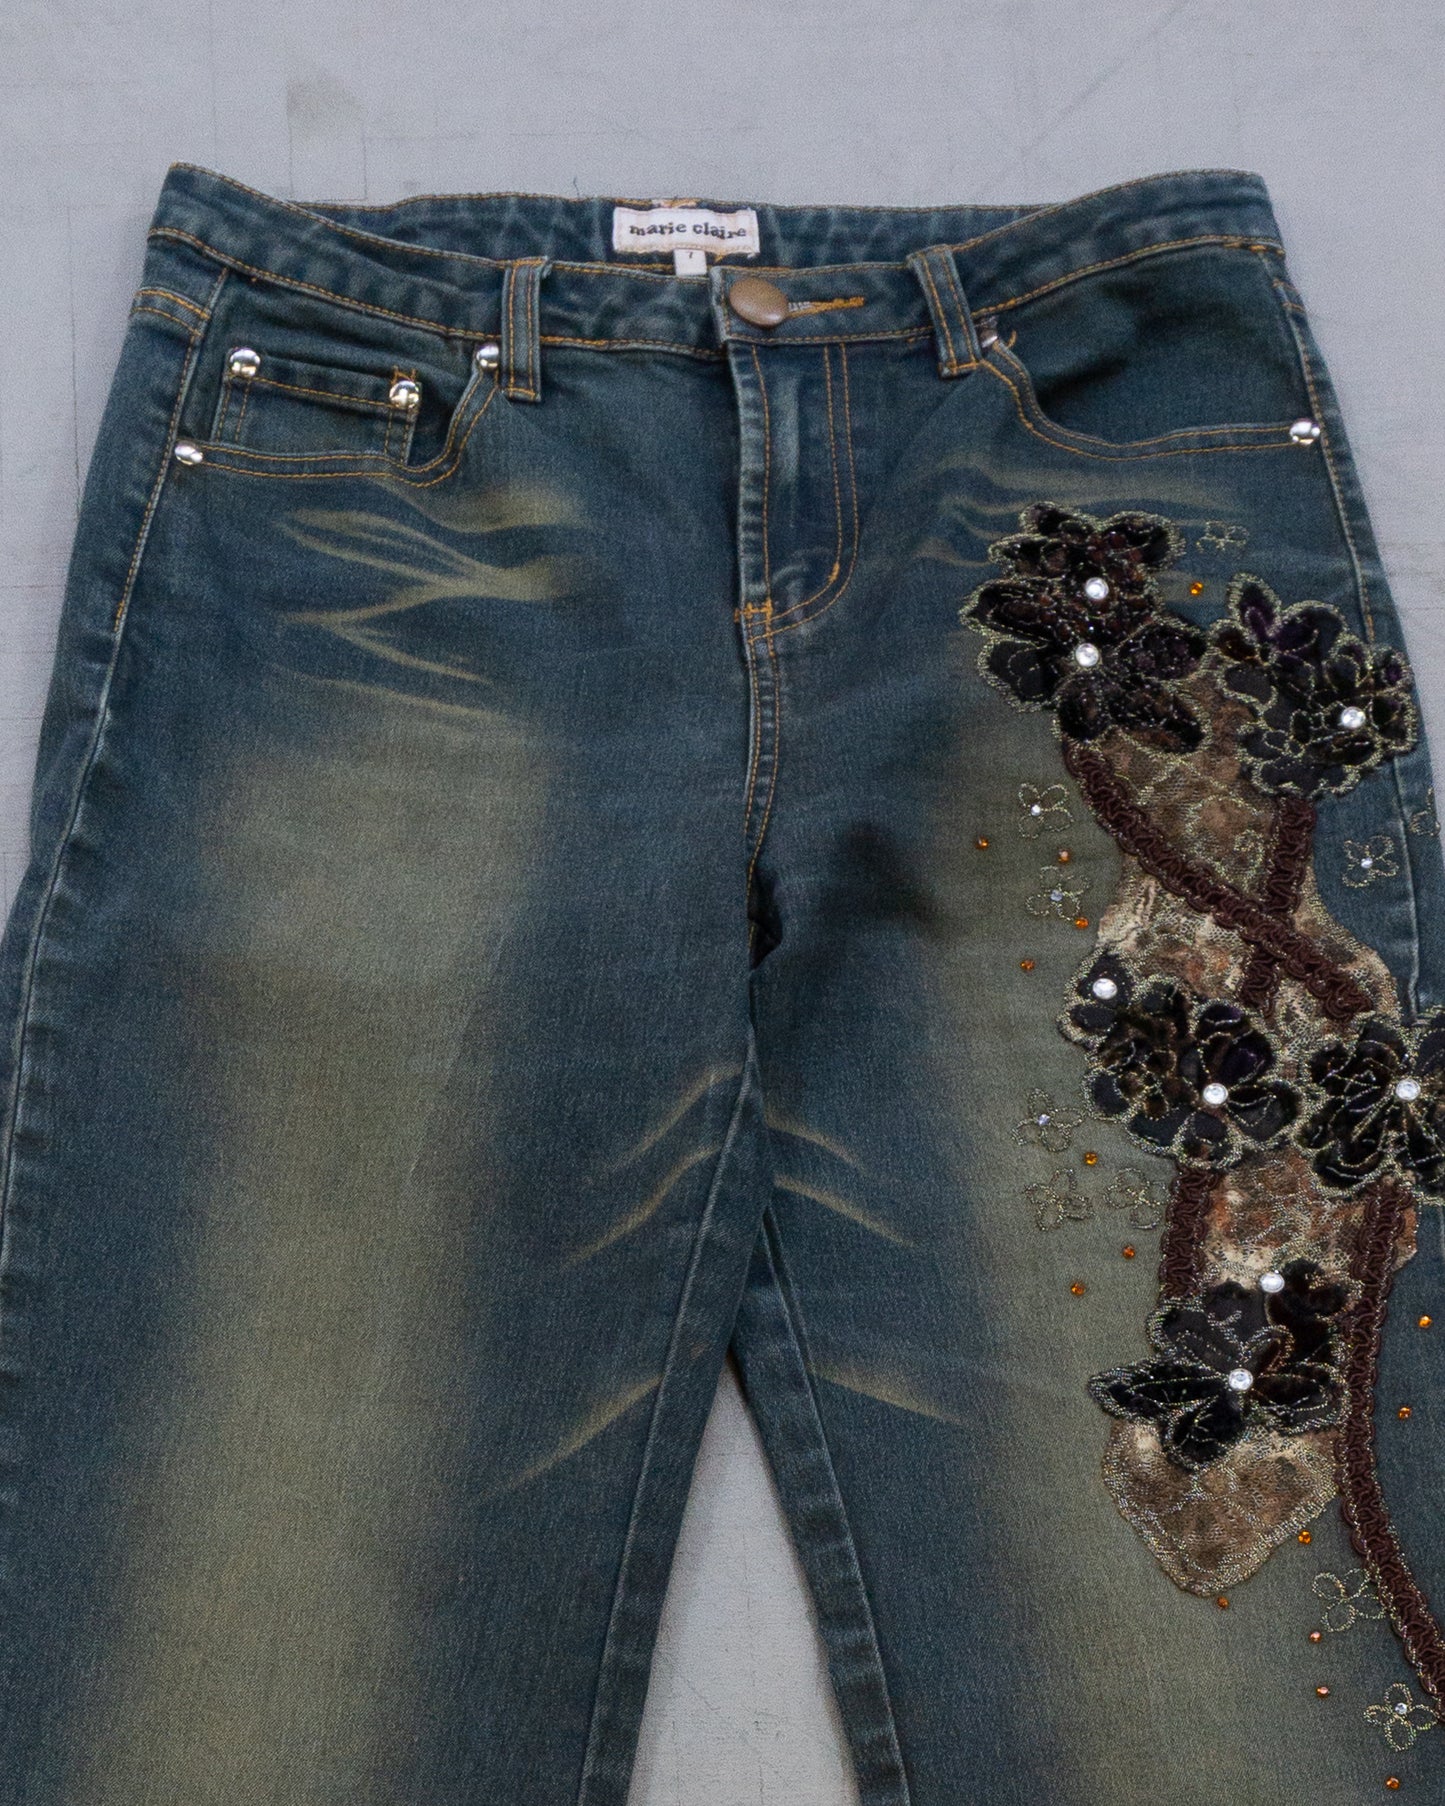 Y2K 'Marie Claire' Embroidered Jeans (28x28)